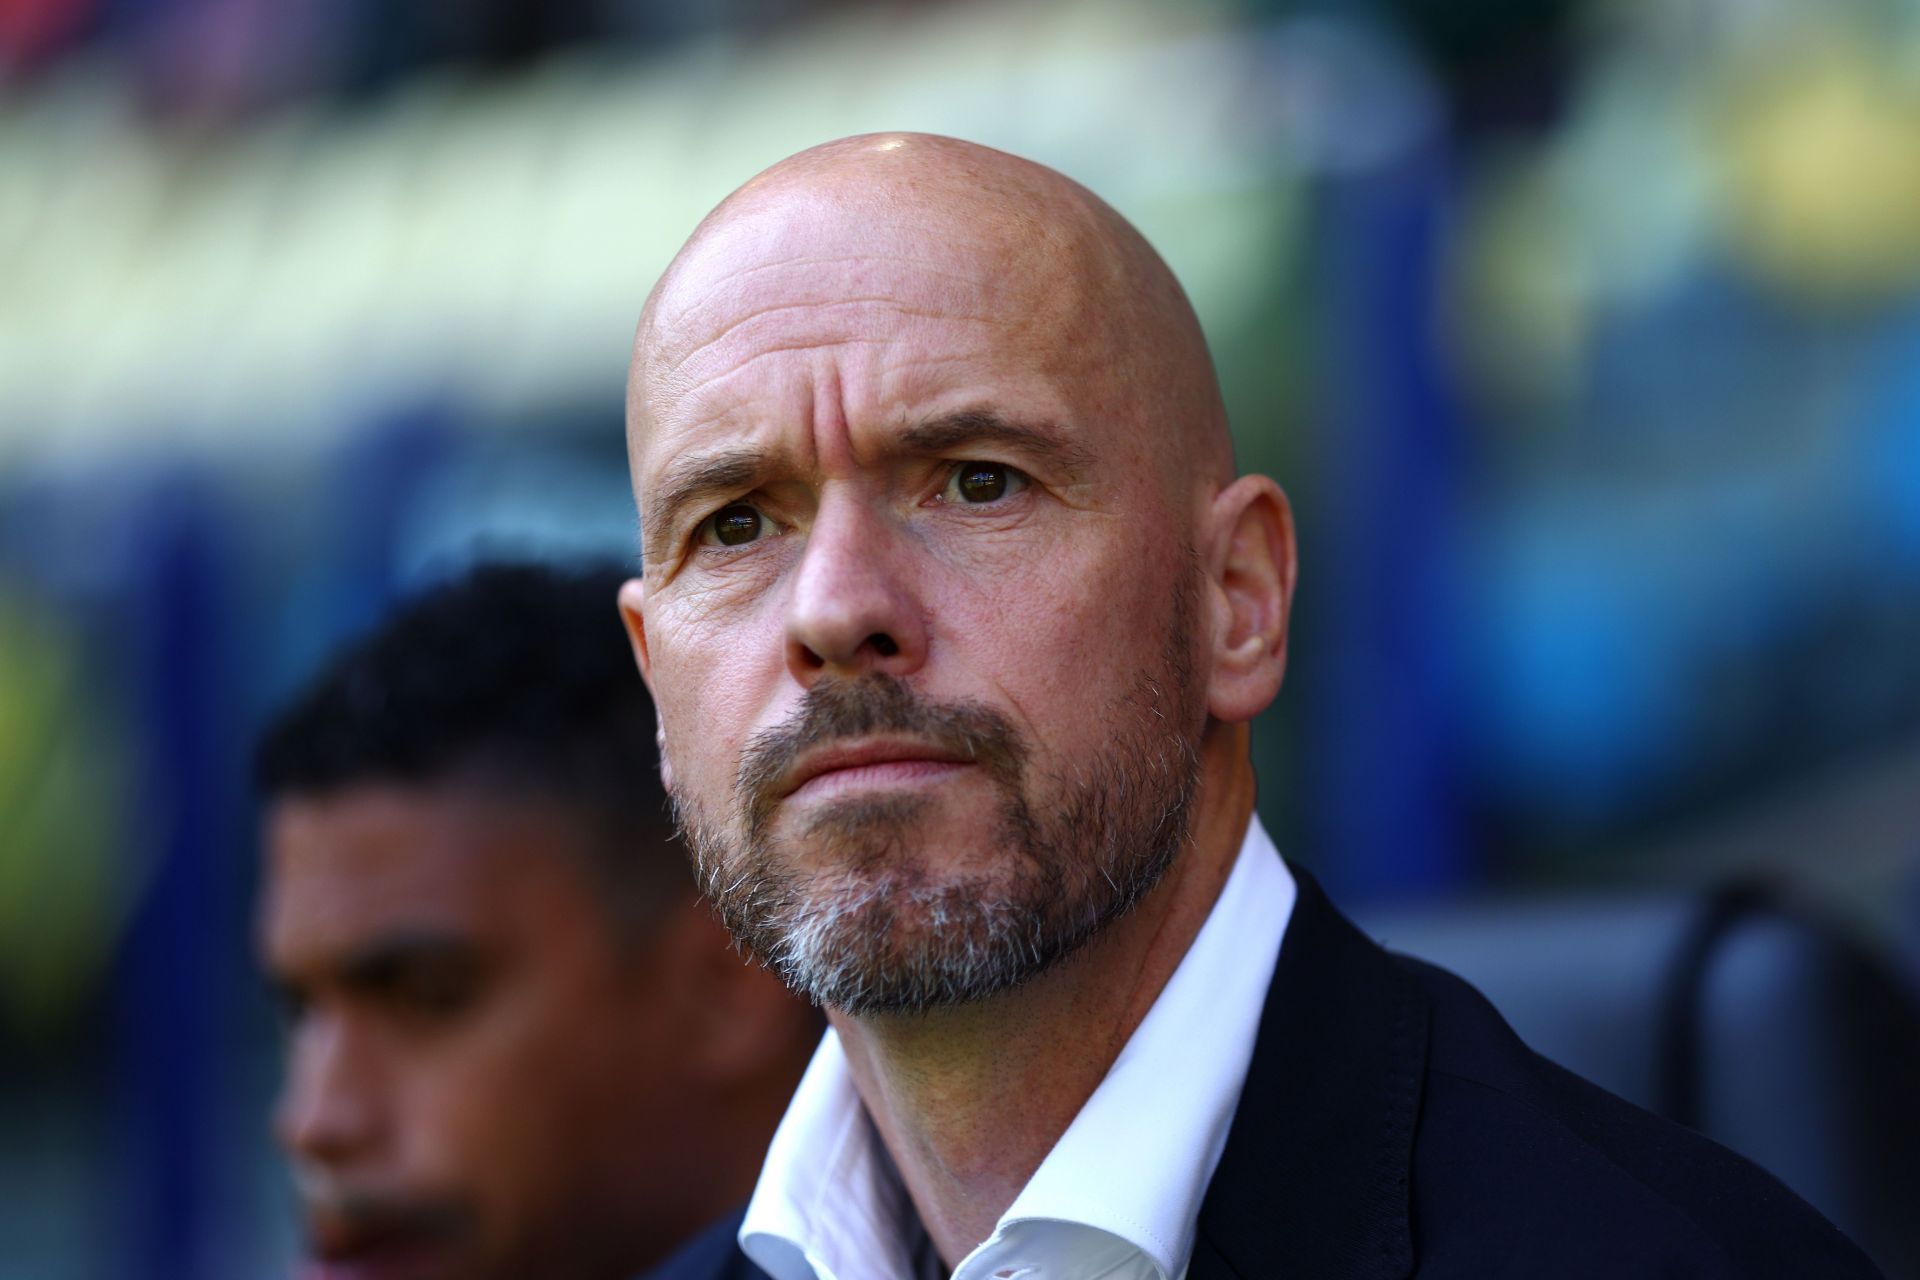 Erik ten Hag is excited to work with the talismanic forward